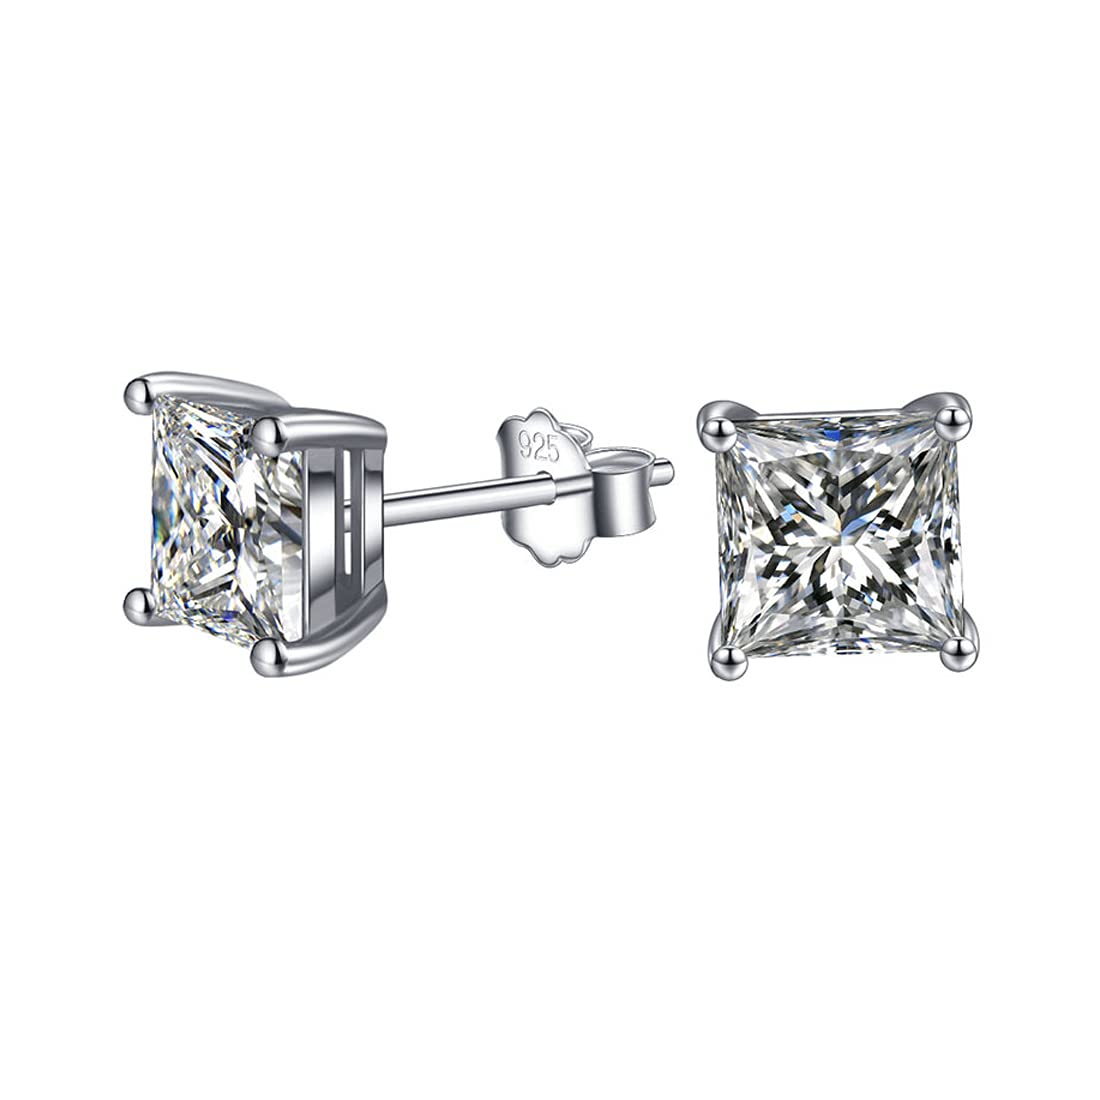 Yellow Chimes Elegant 925 Sterling Silver Hallmark and Certified Purity Square Crystal Stud Earrings for Women and Girls (Style-2)